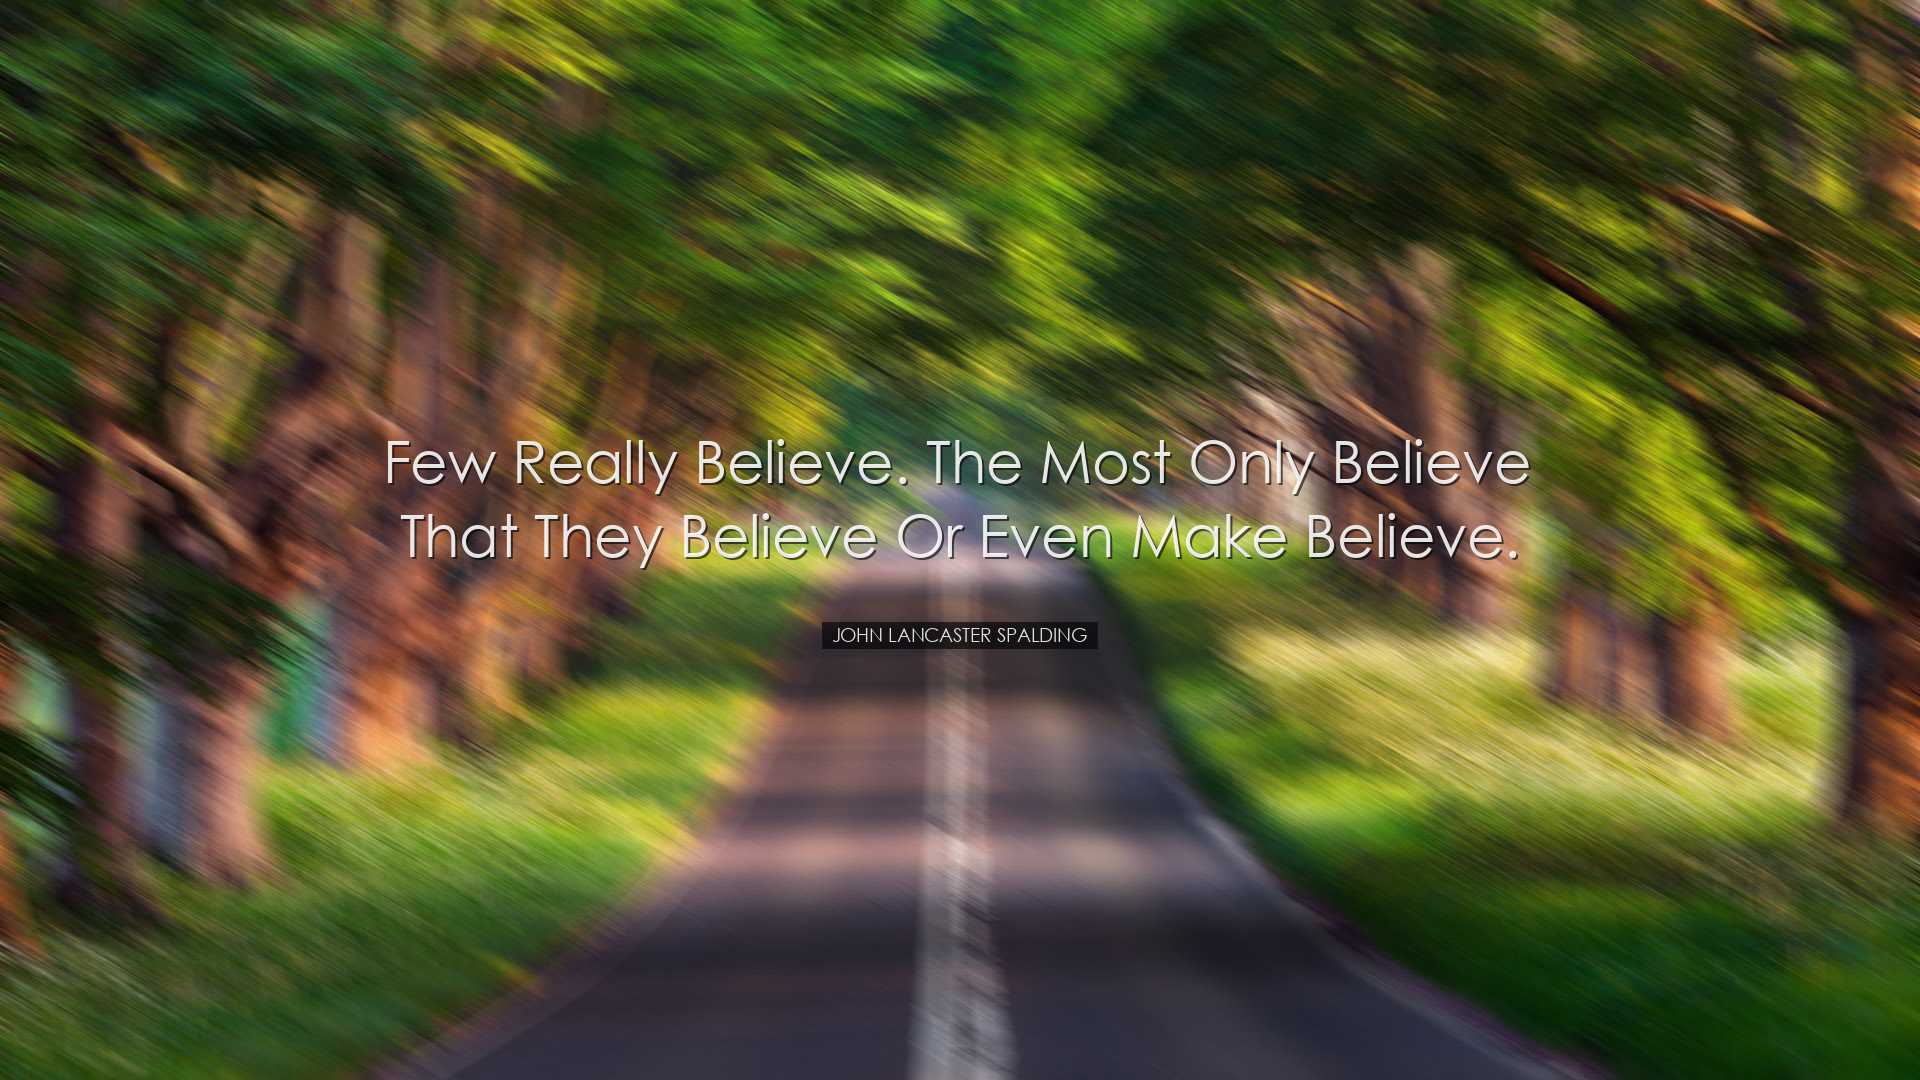 Few really believe. The most only believe that they believe or eve